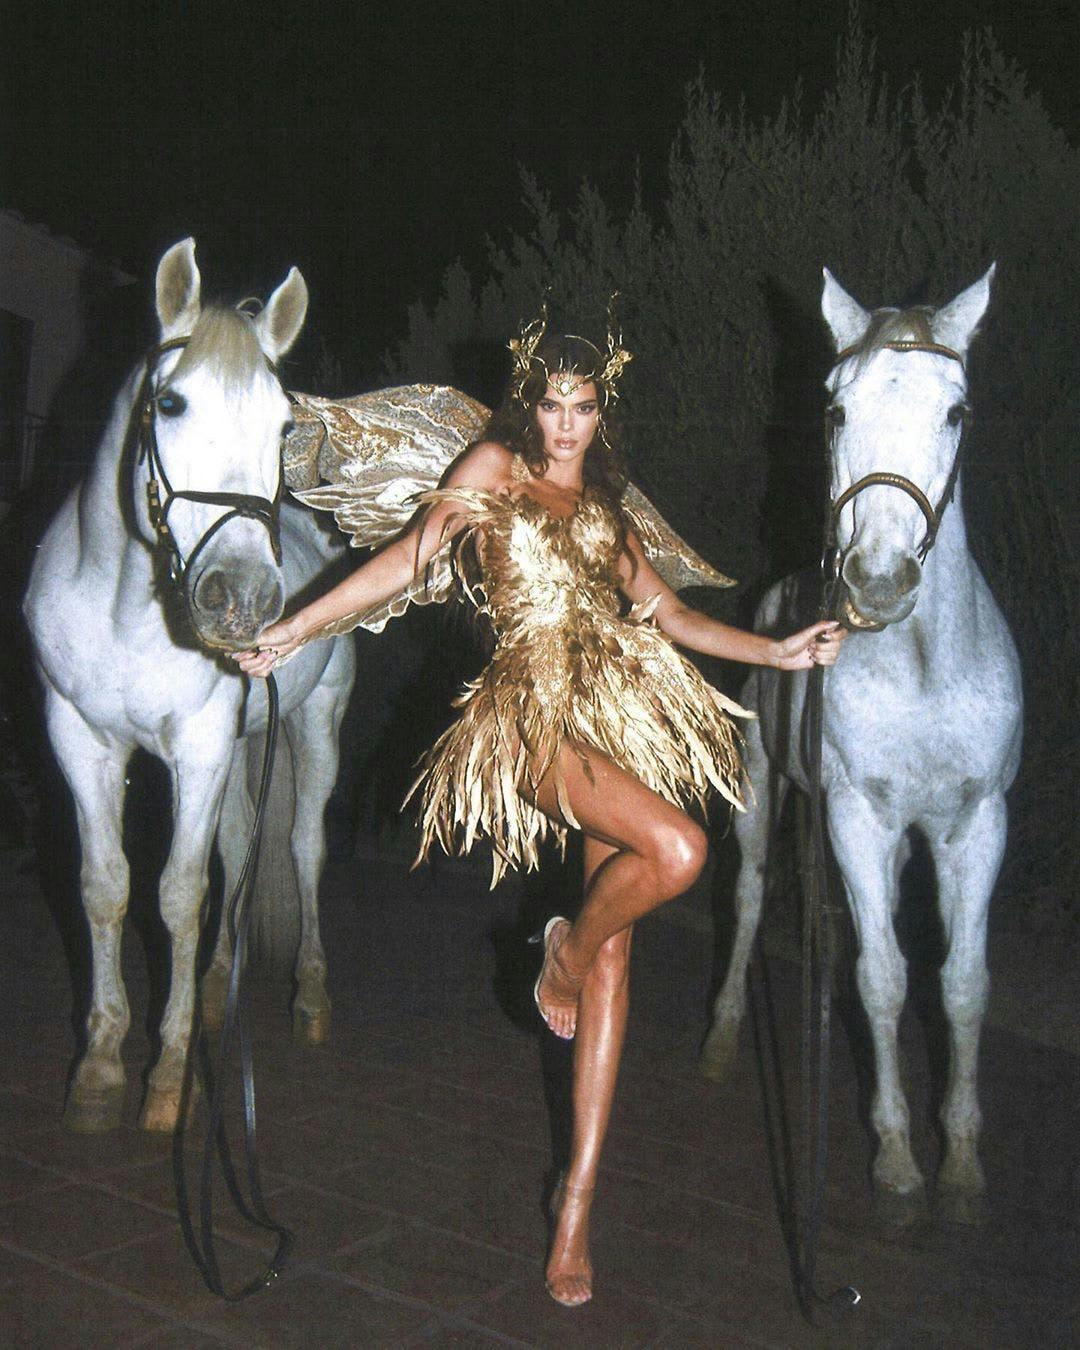 kendall jenner in a gold fringe mini dress posing next to two white horses